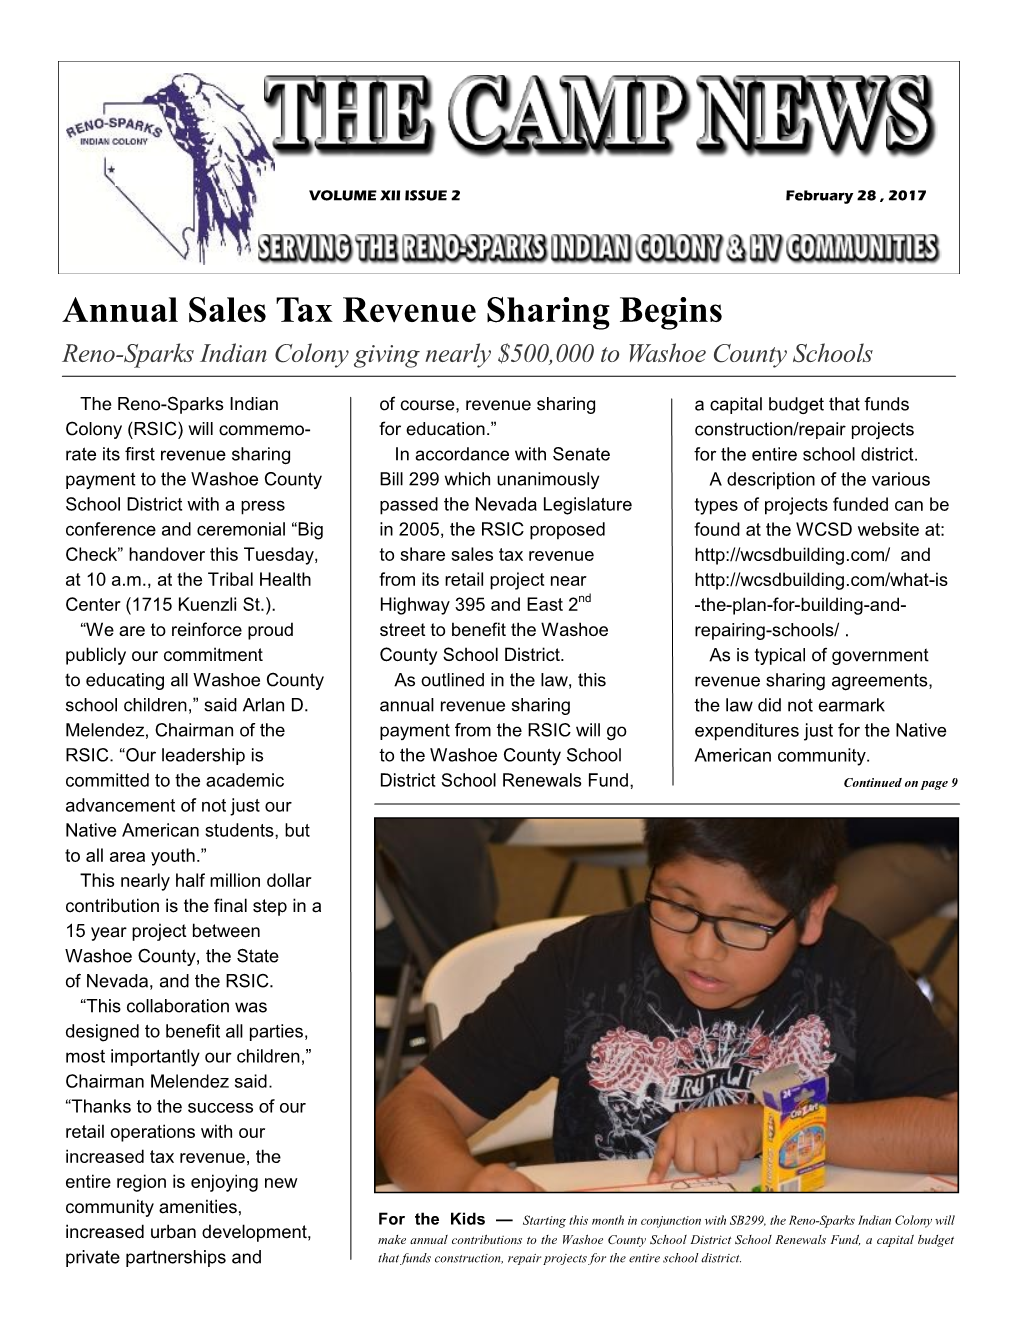 Annual Sales Tax Revenue Sharing Begins Reno-Sparks Indian Colony Giving Nearly $500000 to Washoe County Schools